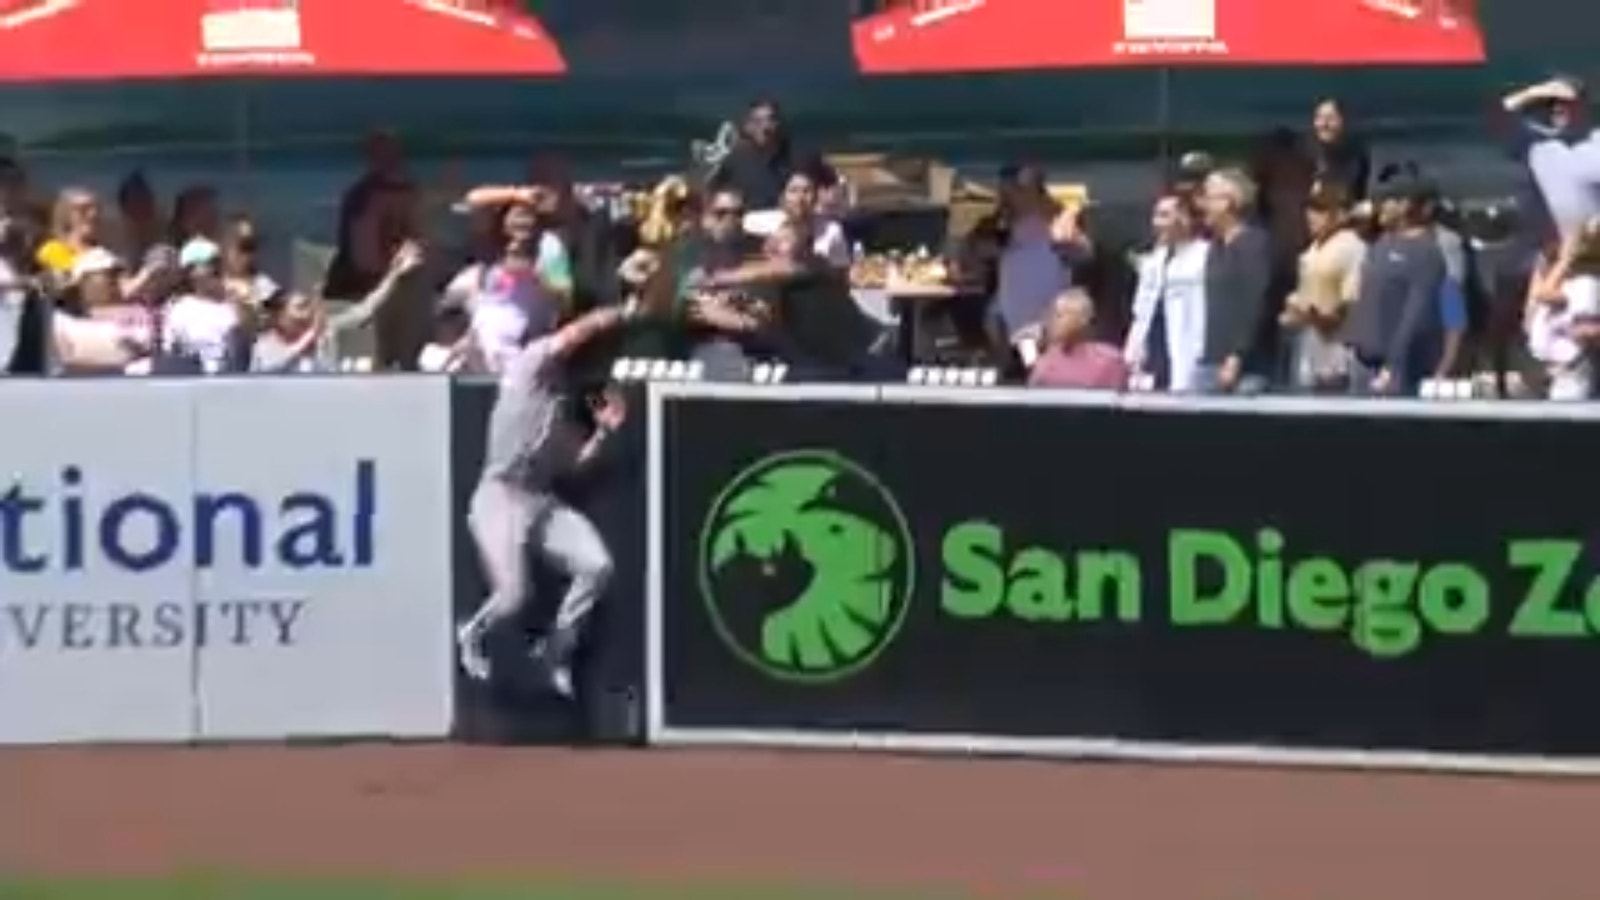 Sam Hilliard of the Braves makes an incredible catch to rob Manny Machado of HR